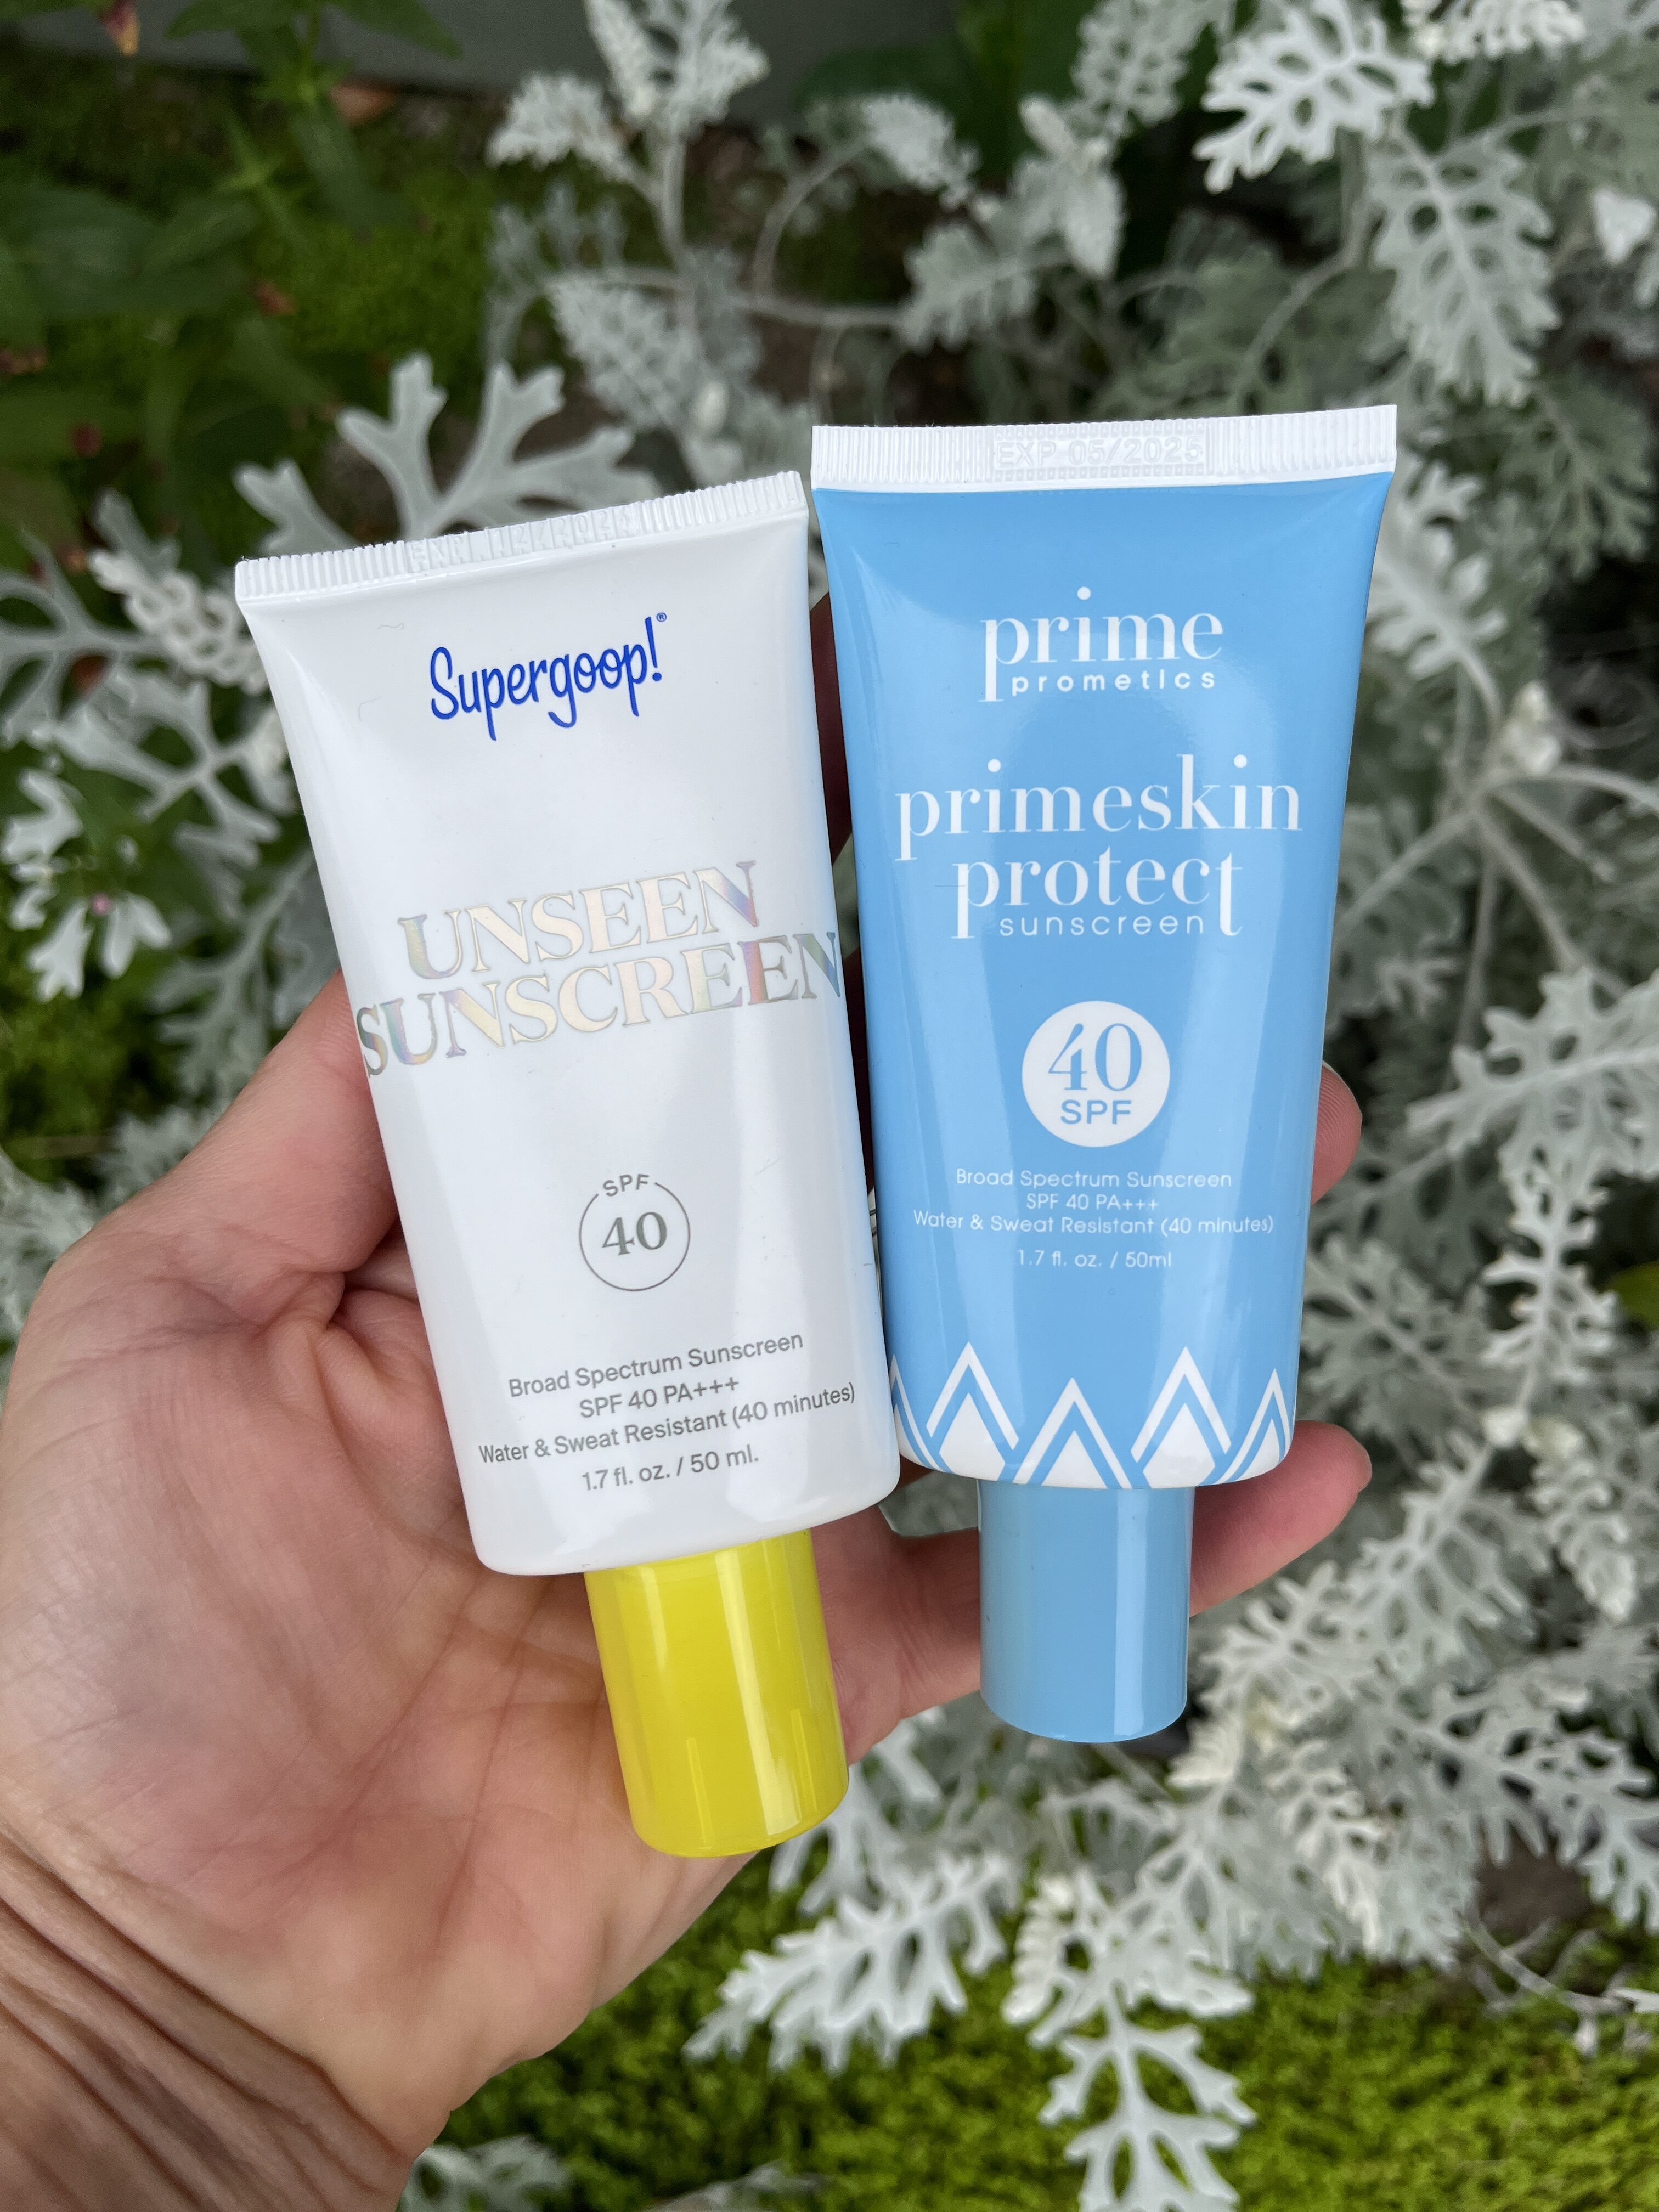 Prime Prometics vs. Supergoop!: Which Sunscreen Works For My Aging Skin?